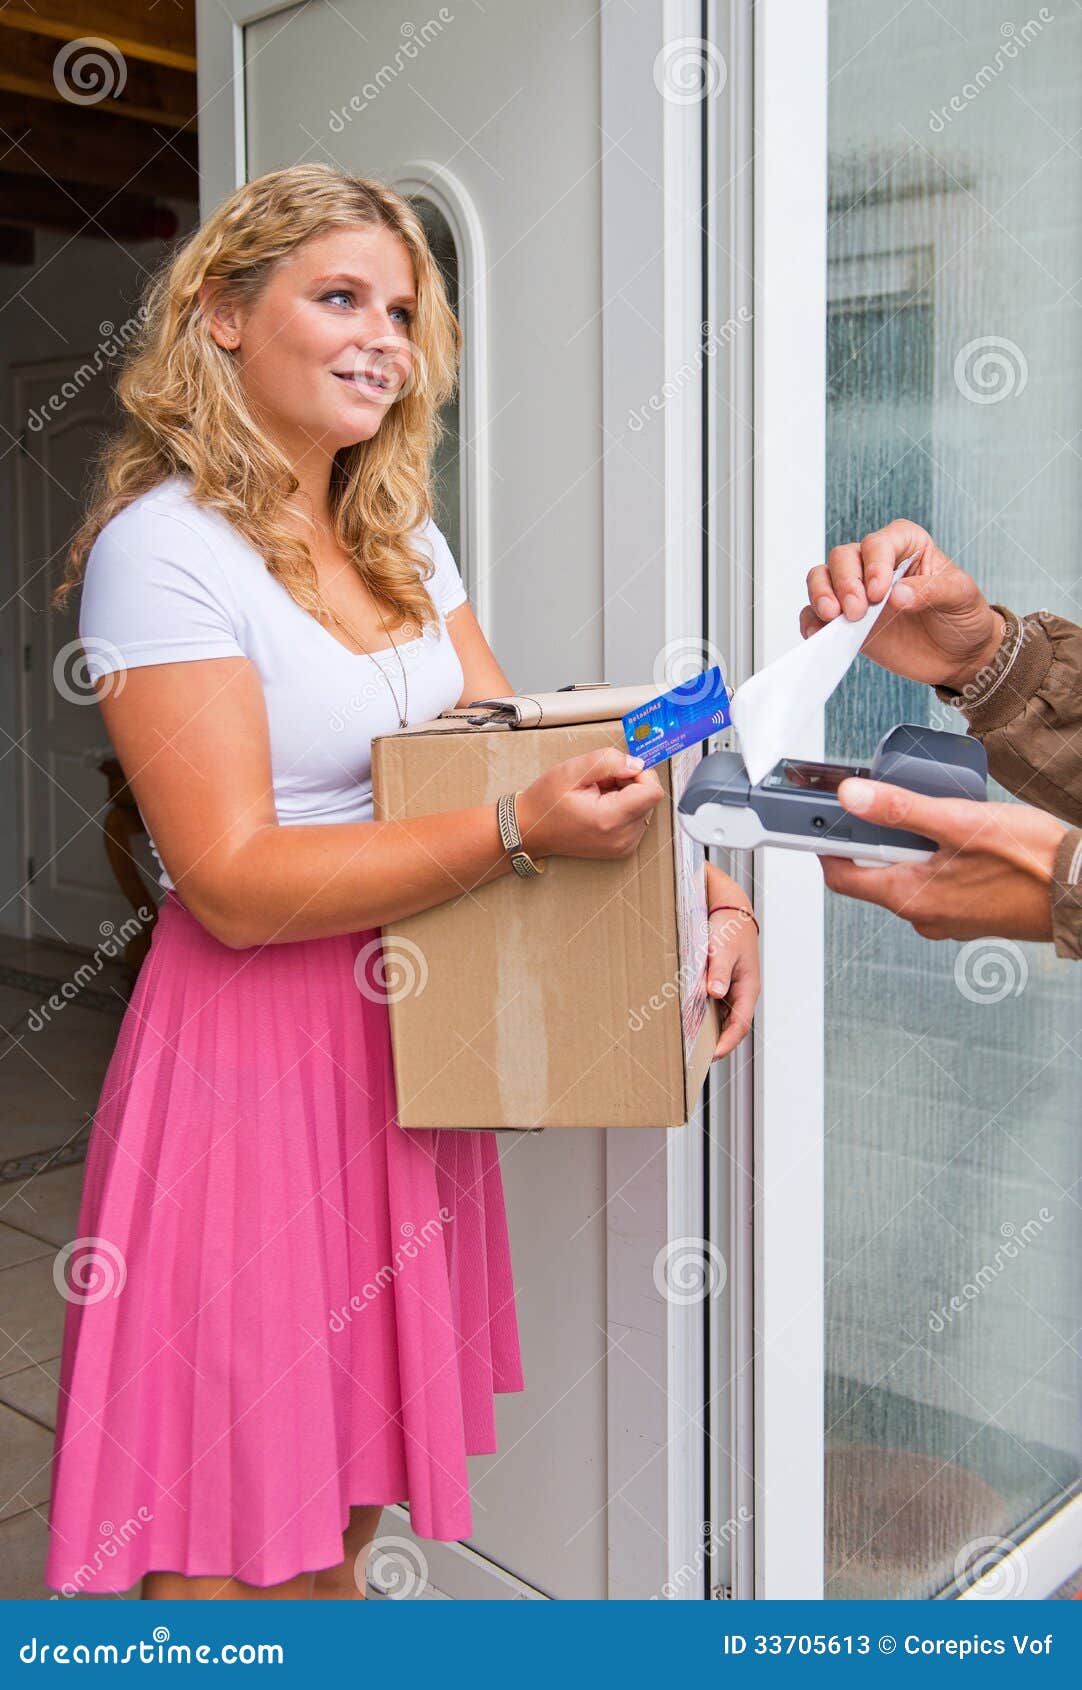 Housewife Accepting Package Stock Photos - Image: 33705613